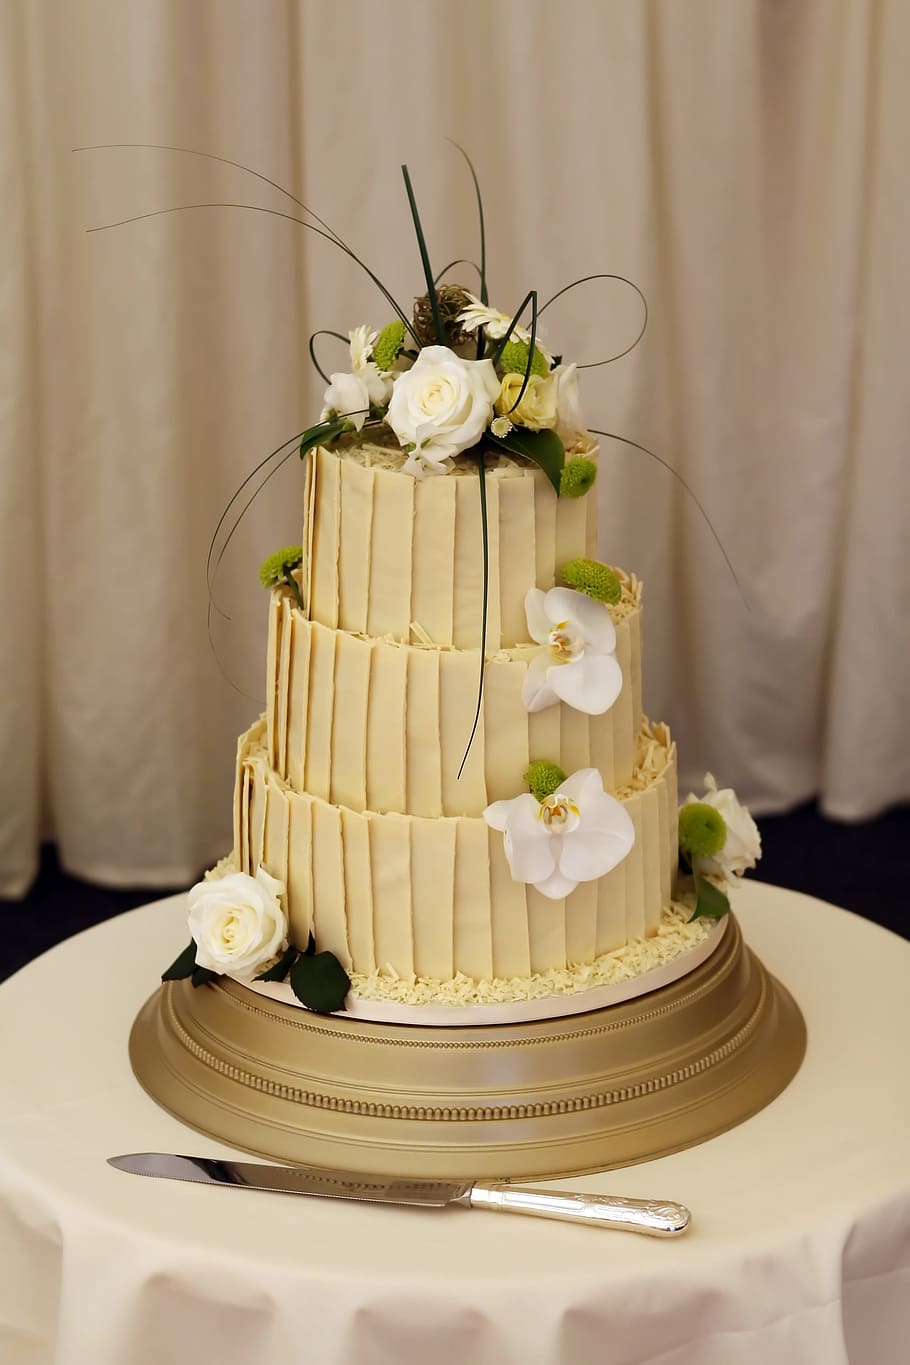 3-layered, floral, cake, white, table, front, curtain, Affair, Anniversary, Attractive